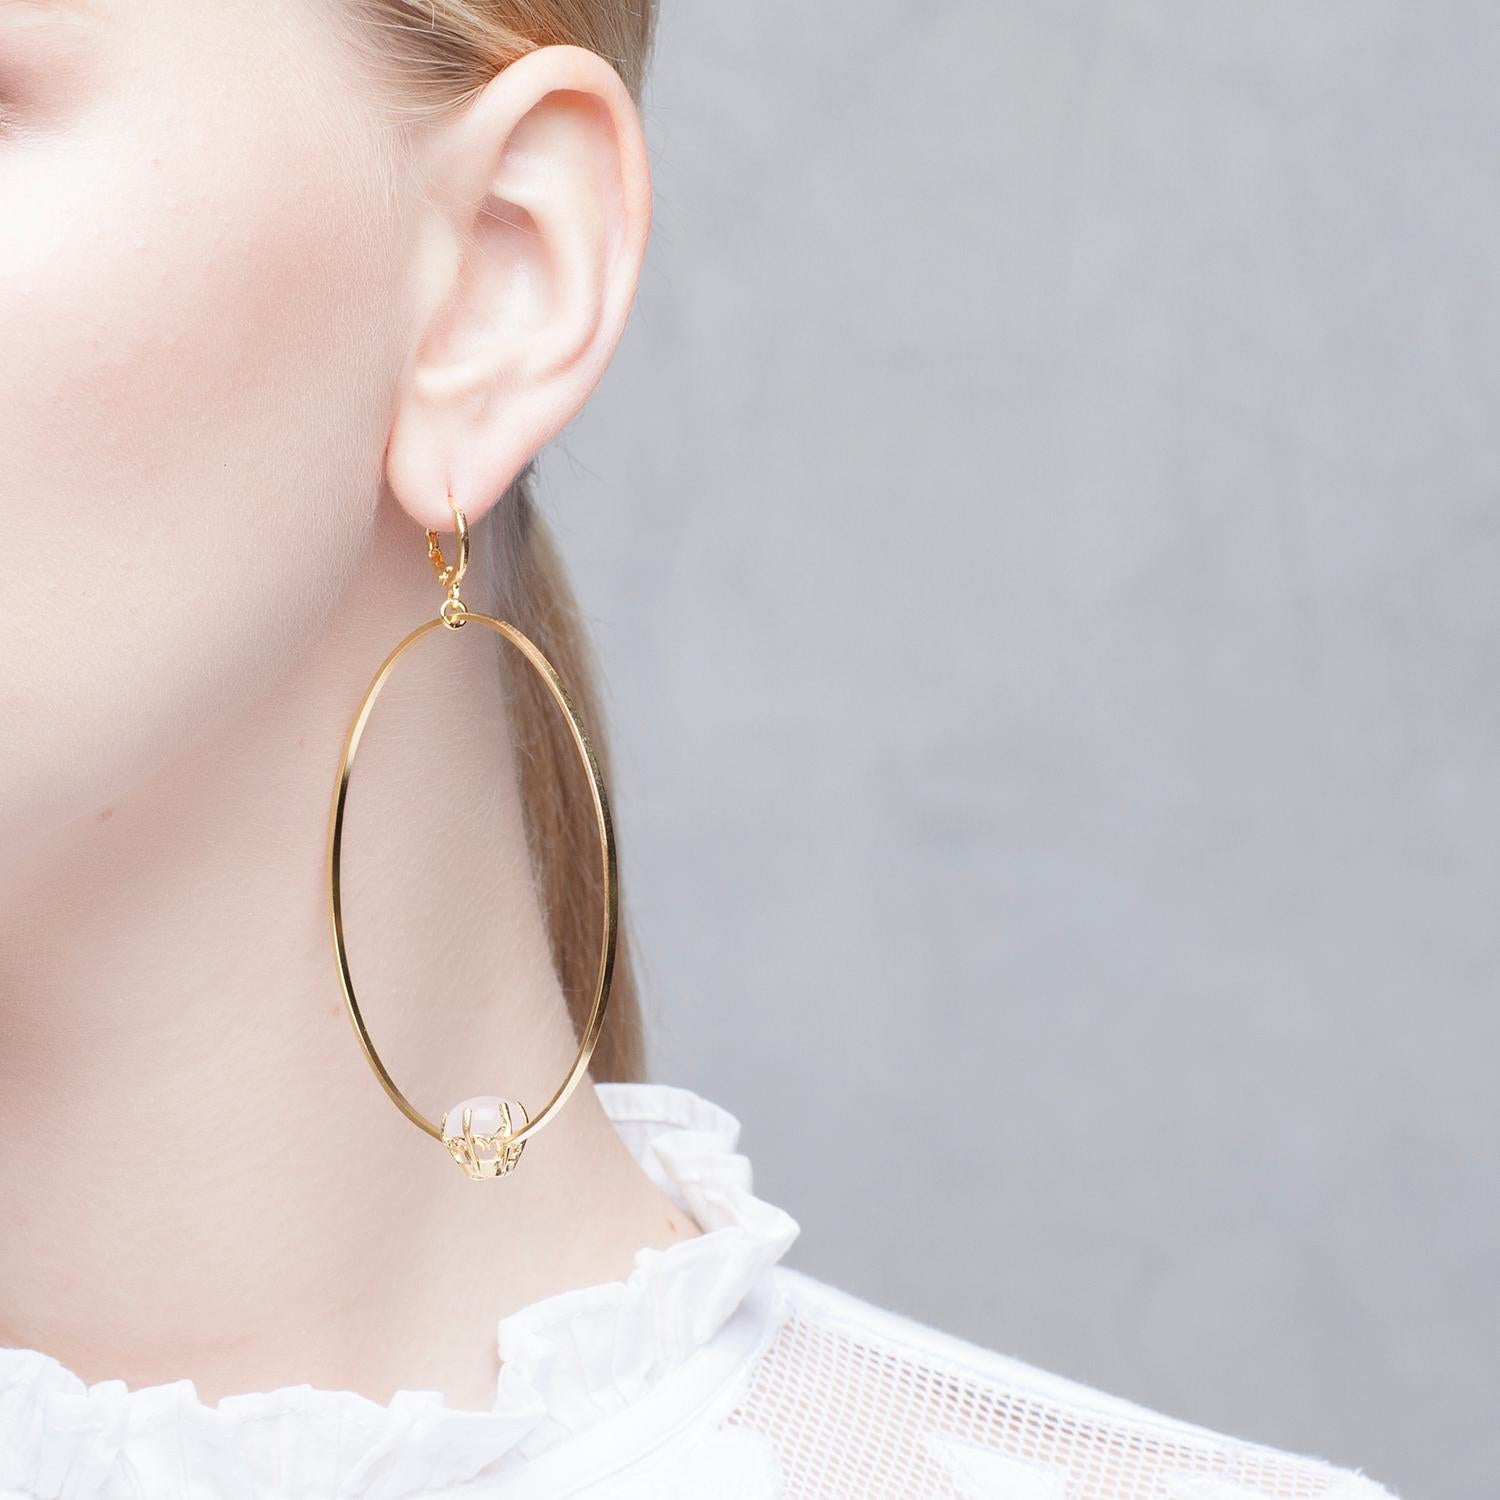 Puro Iosselliani presents its iconic creole big hoop earrings. Made in 18 Karat gold plated silver in Italy, the big hoops float effortlessly by a vintage lever back hook. A reversed green round malachite stone embellishes the hoop for extra